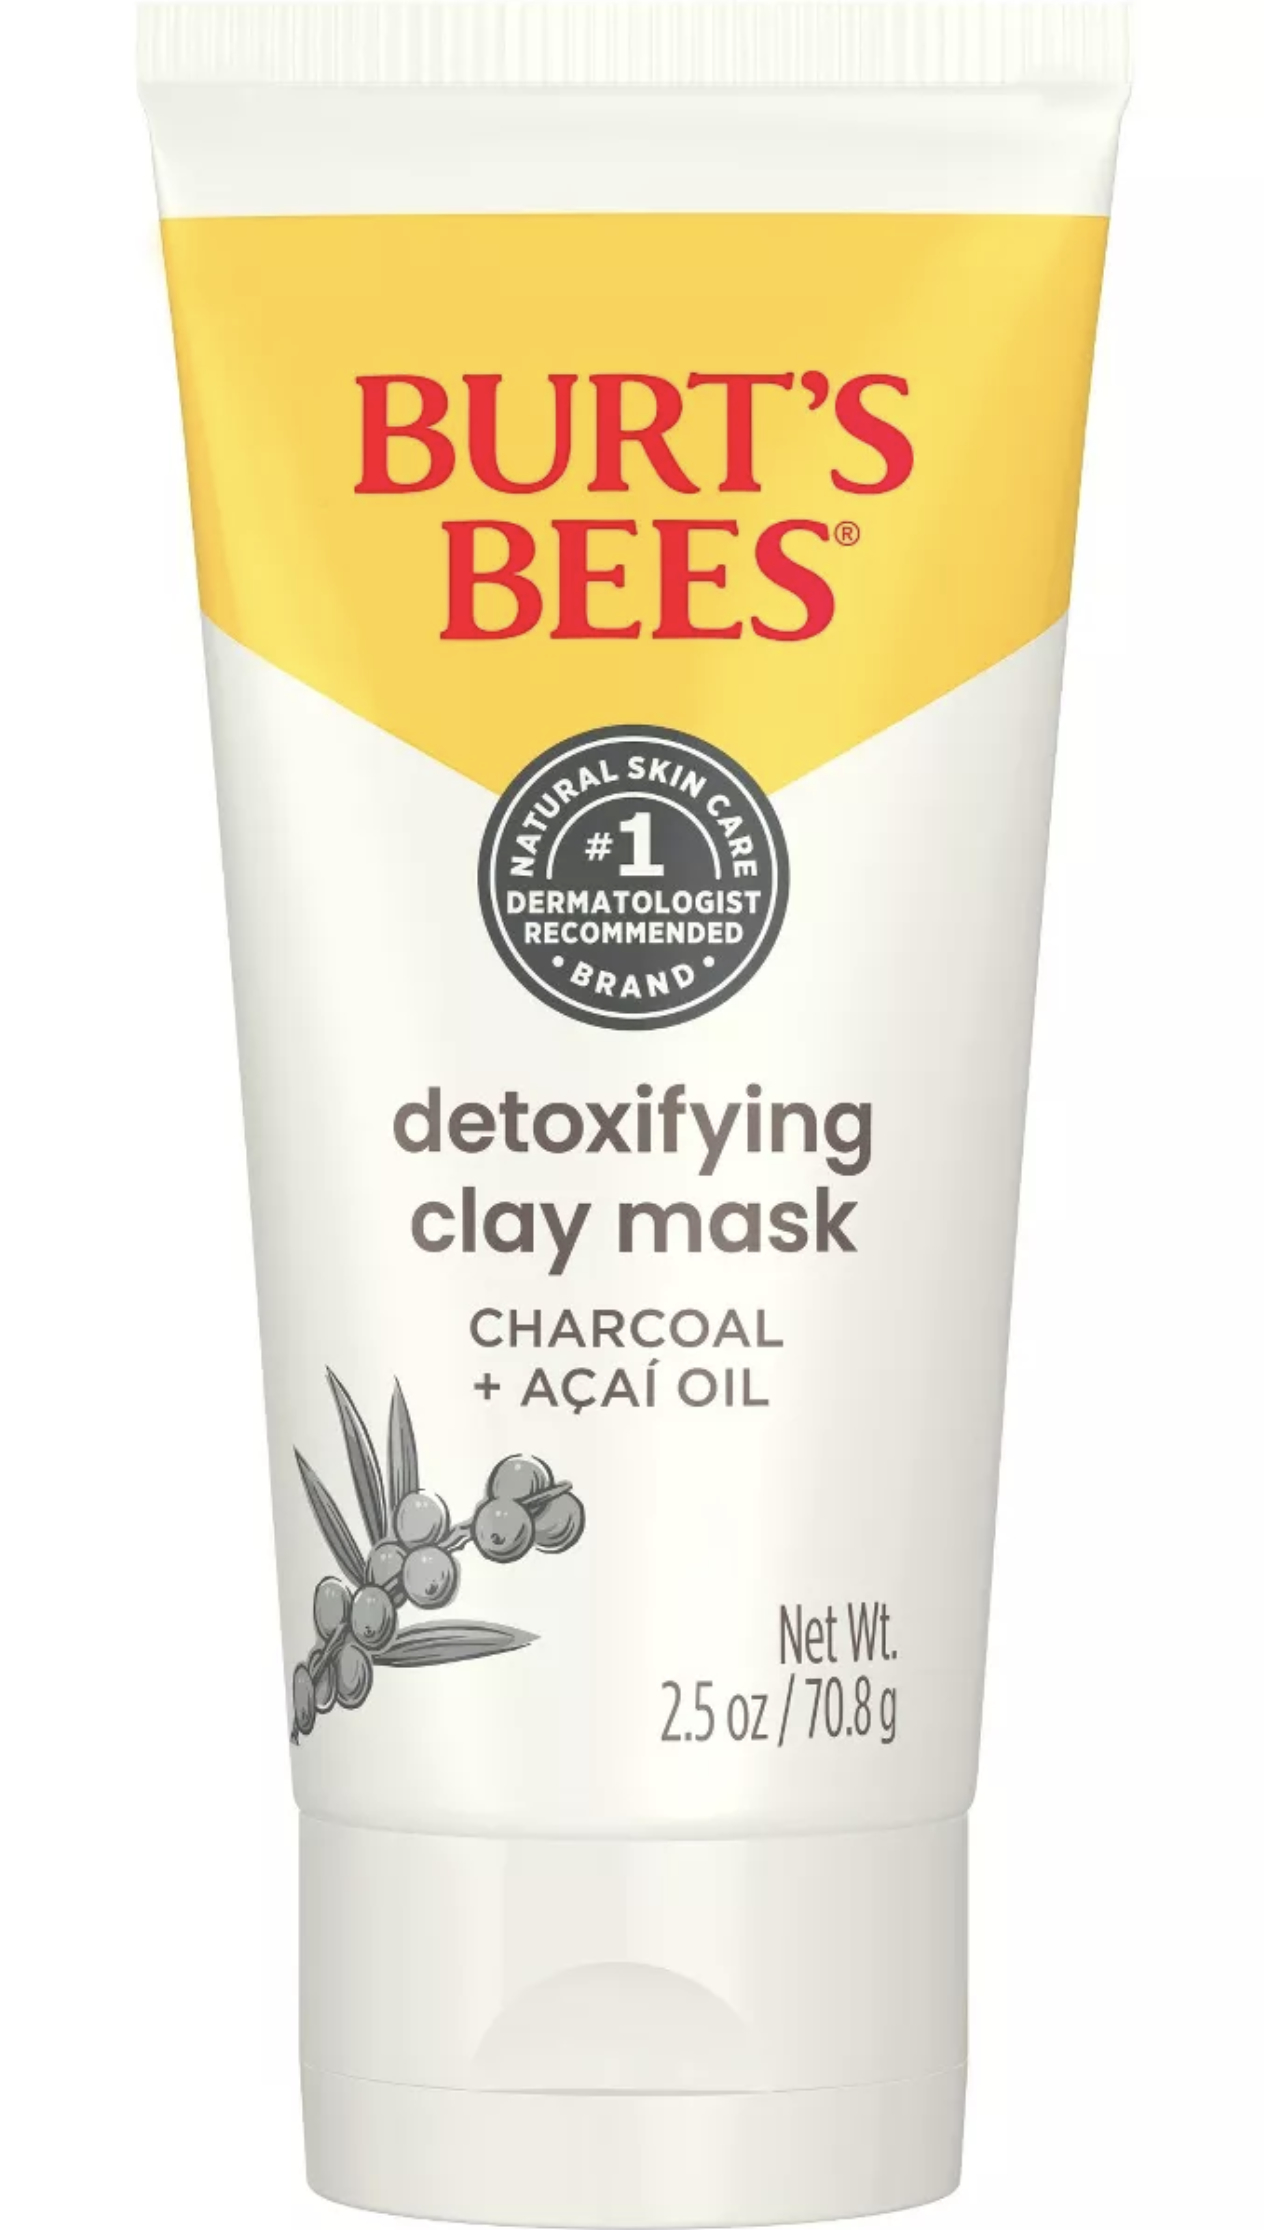 Burt&#x27;s Bees detoxifying clay mask tube with acai oil, dermatologist tested badge on top